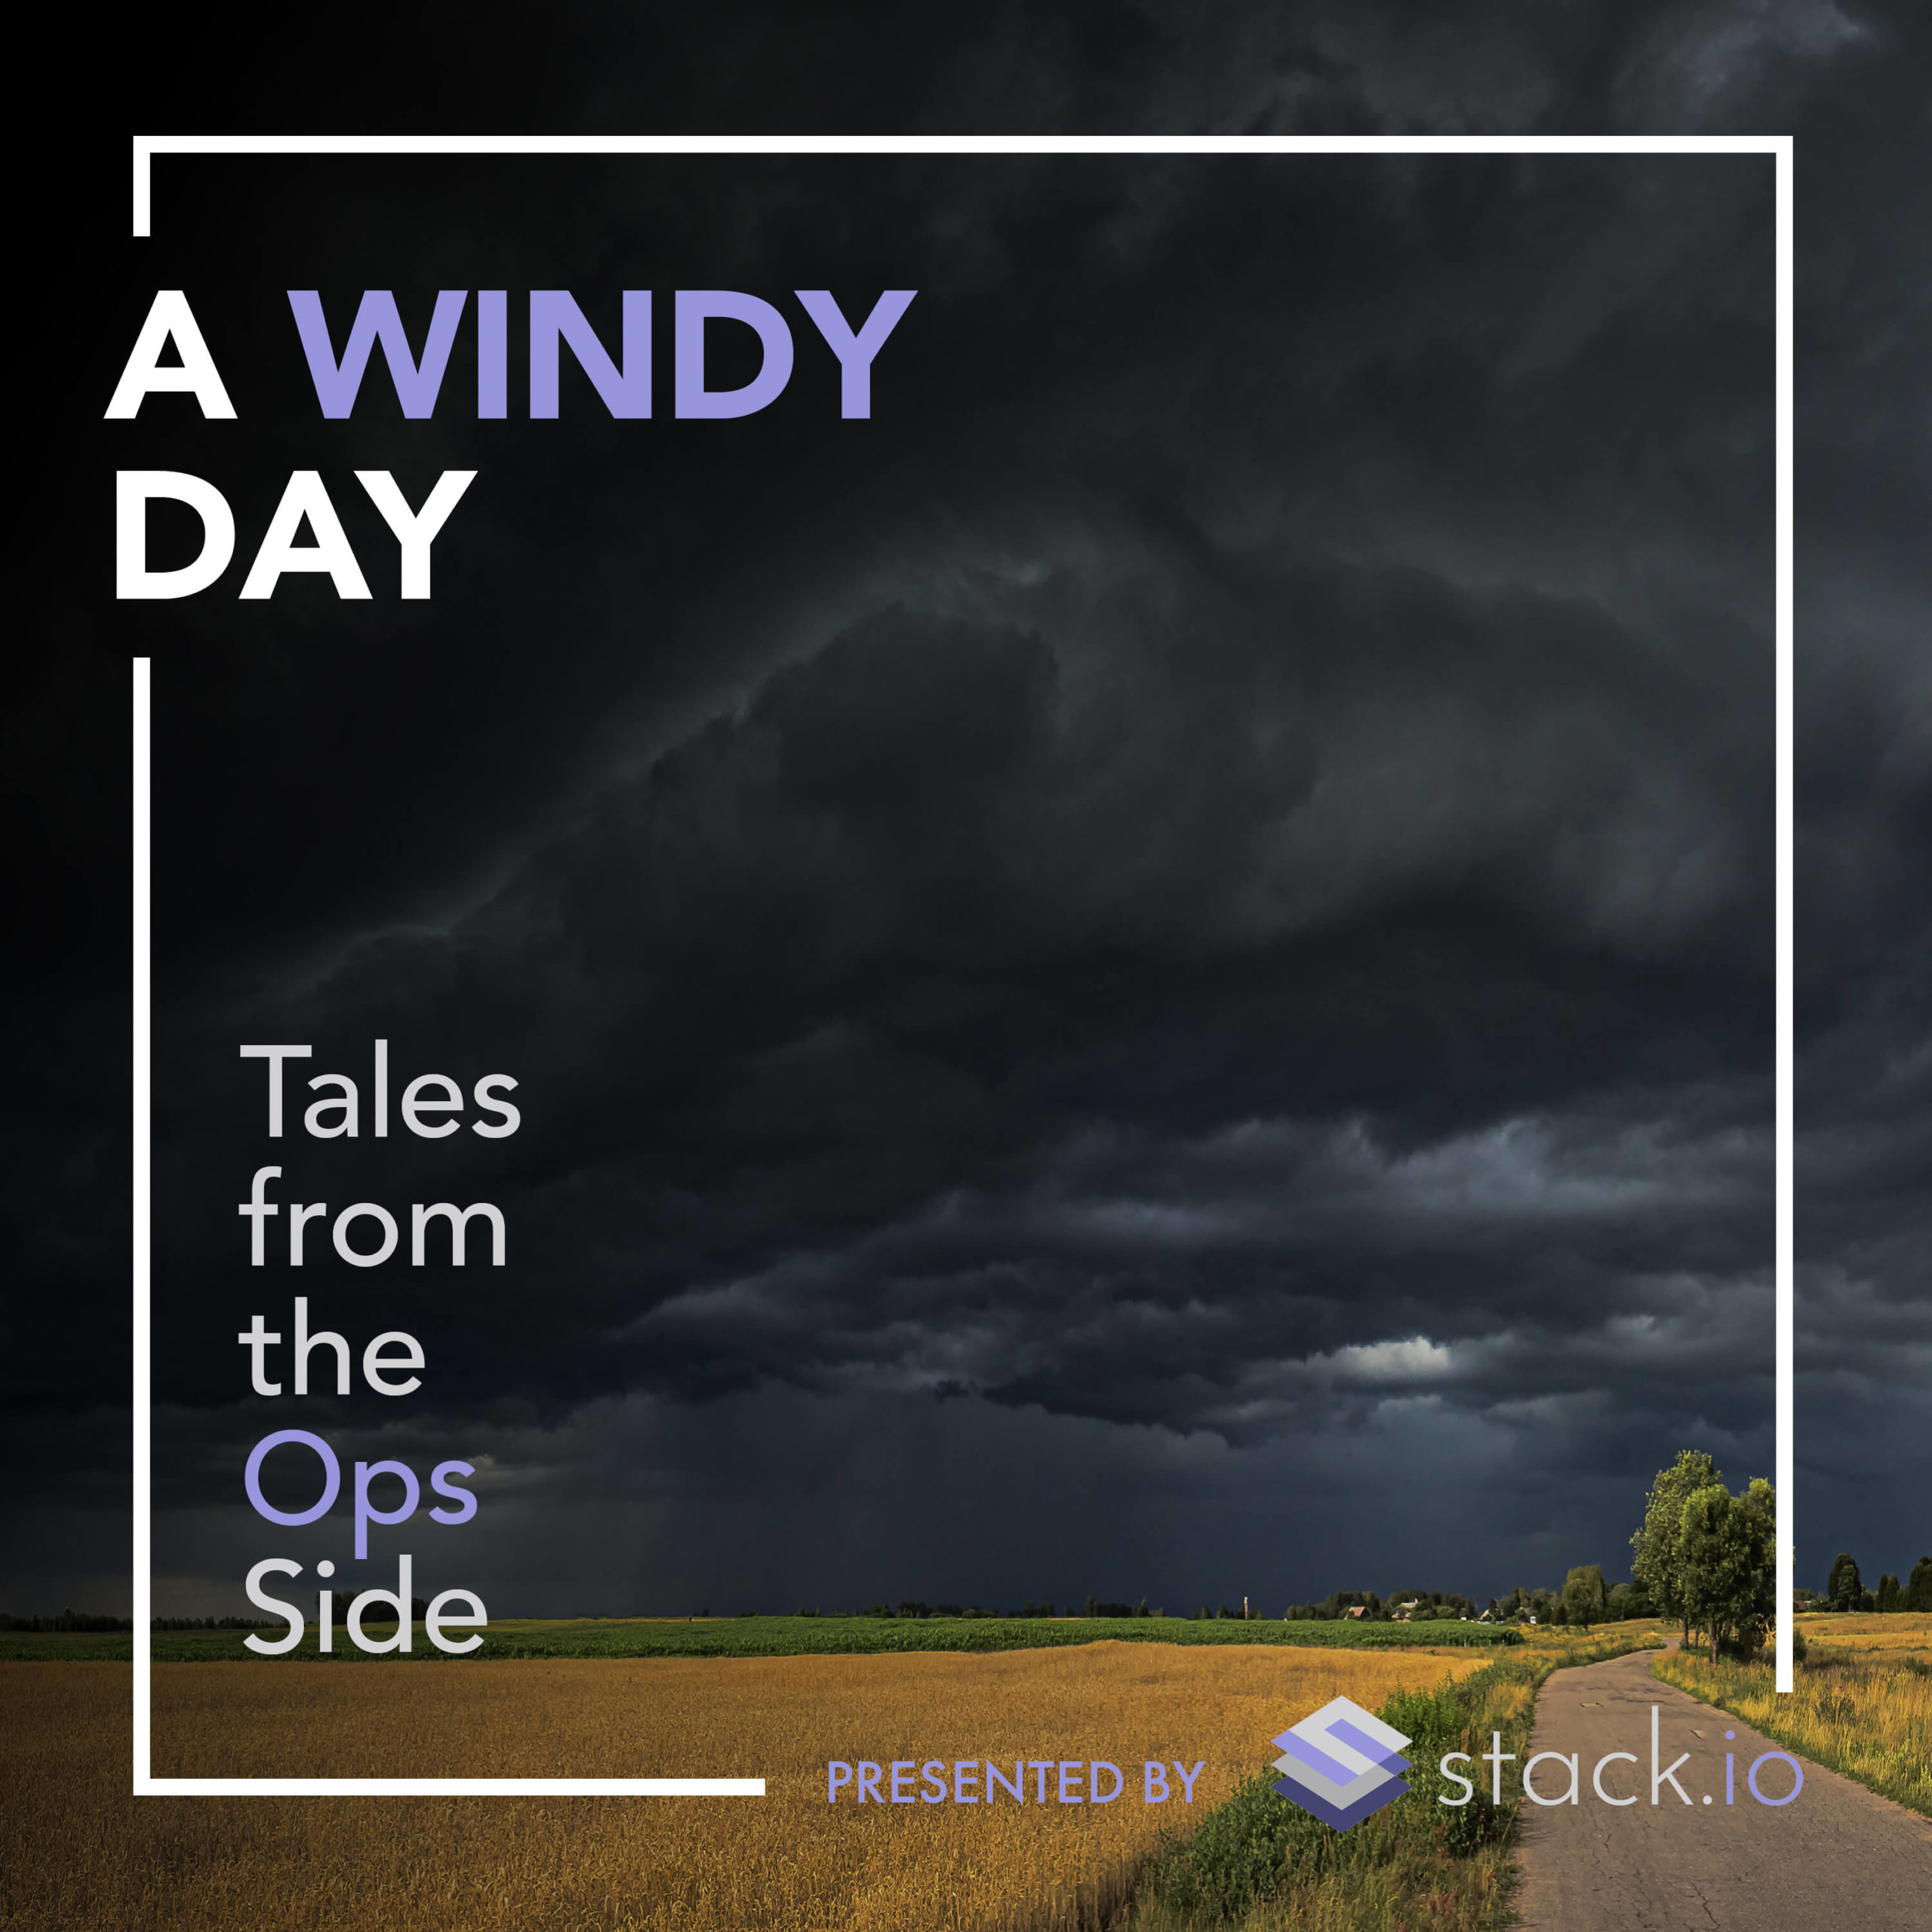 Episode 5 – A Windy Day